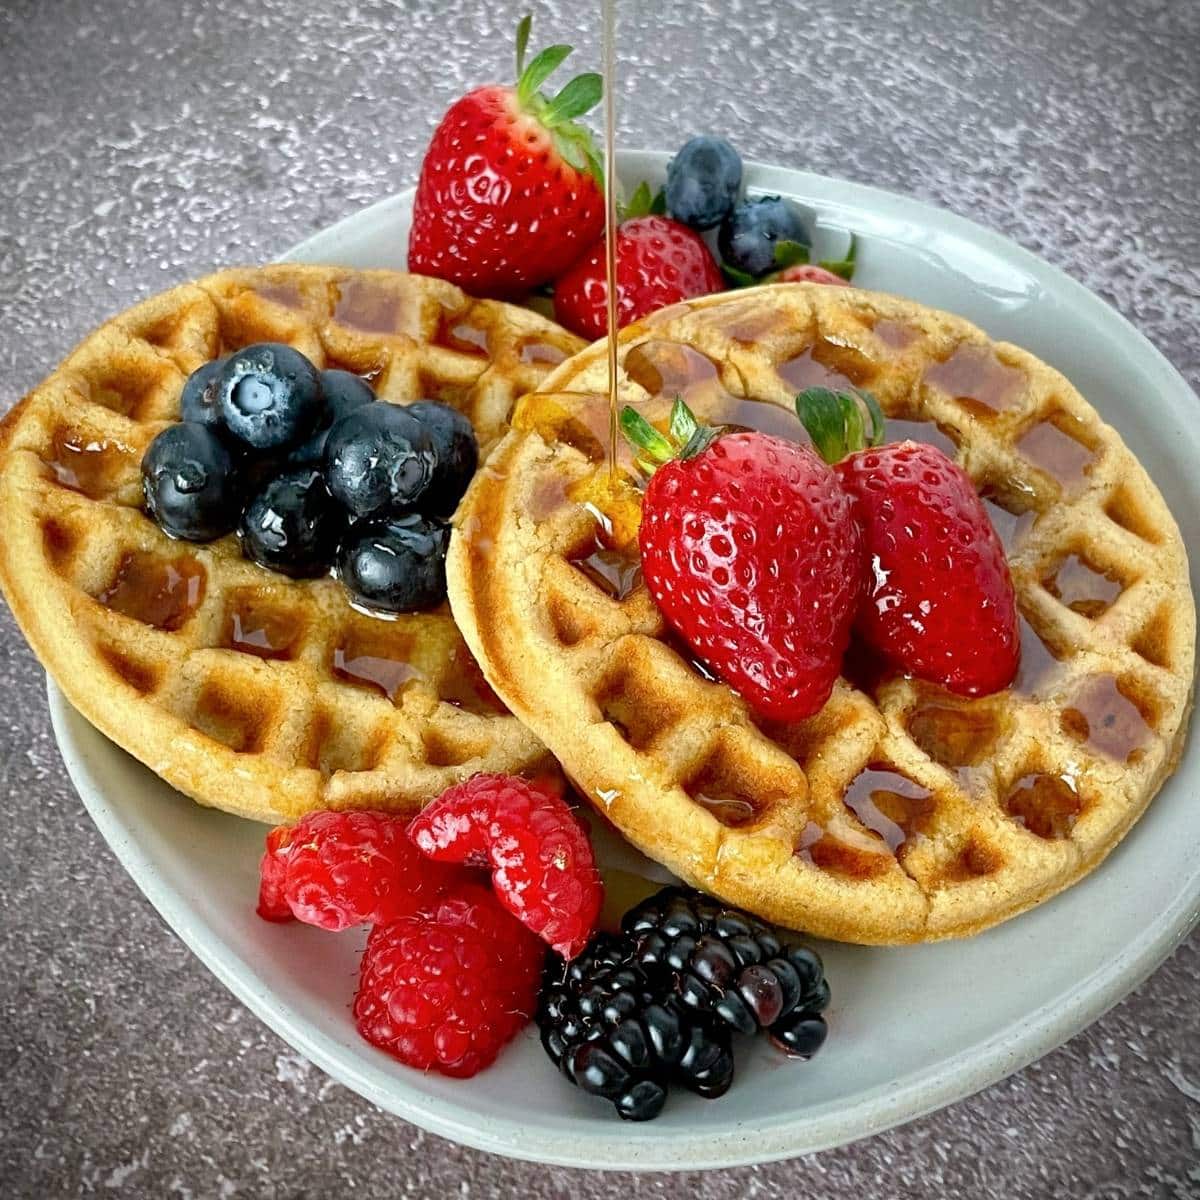 Two waffles topped with fruit and maple syrup.